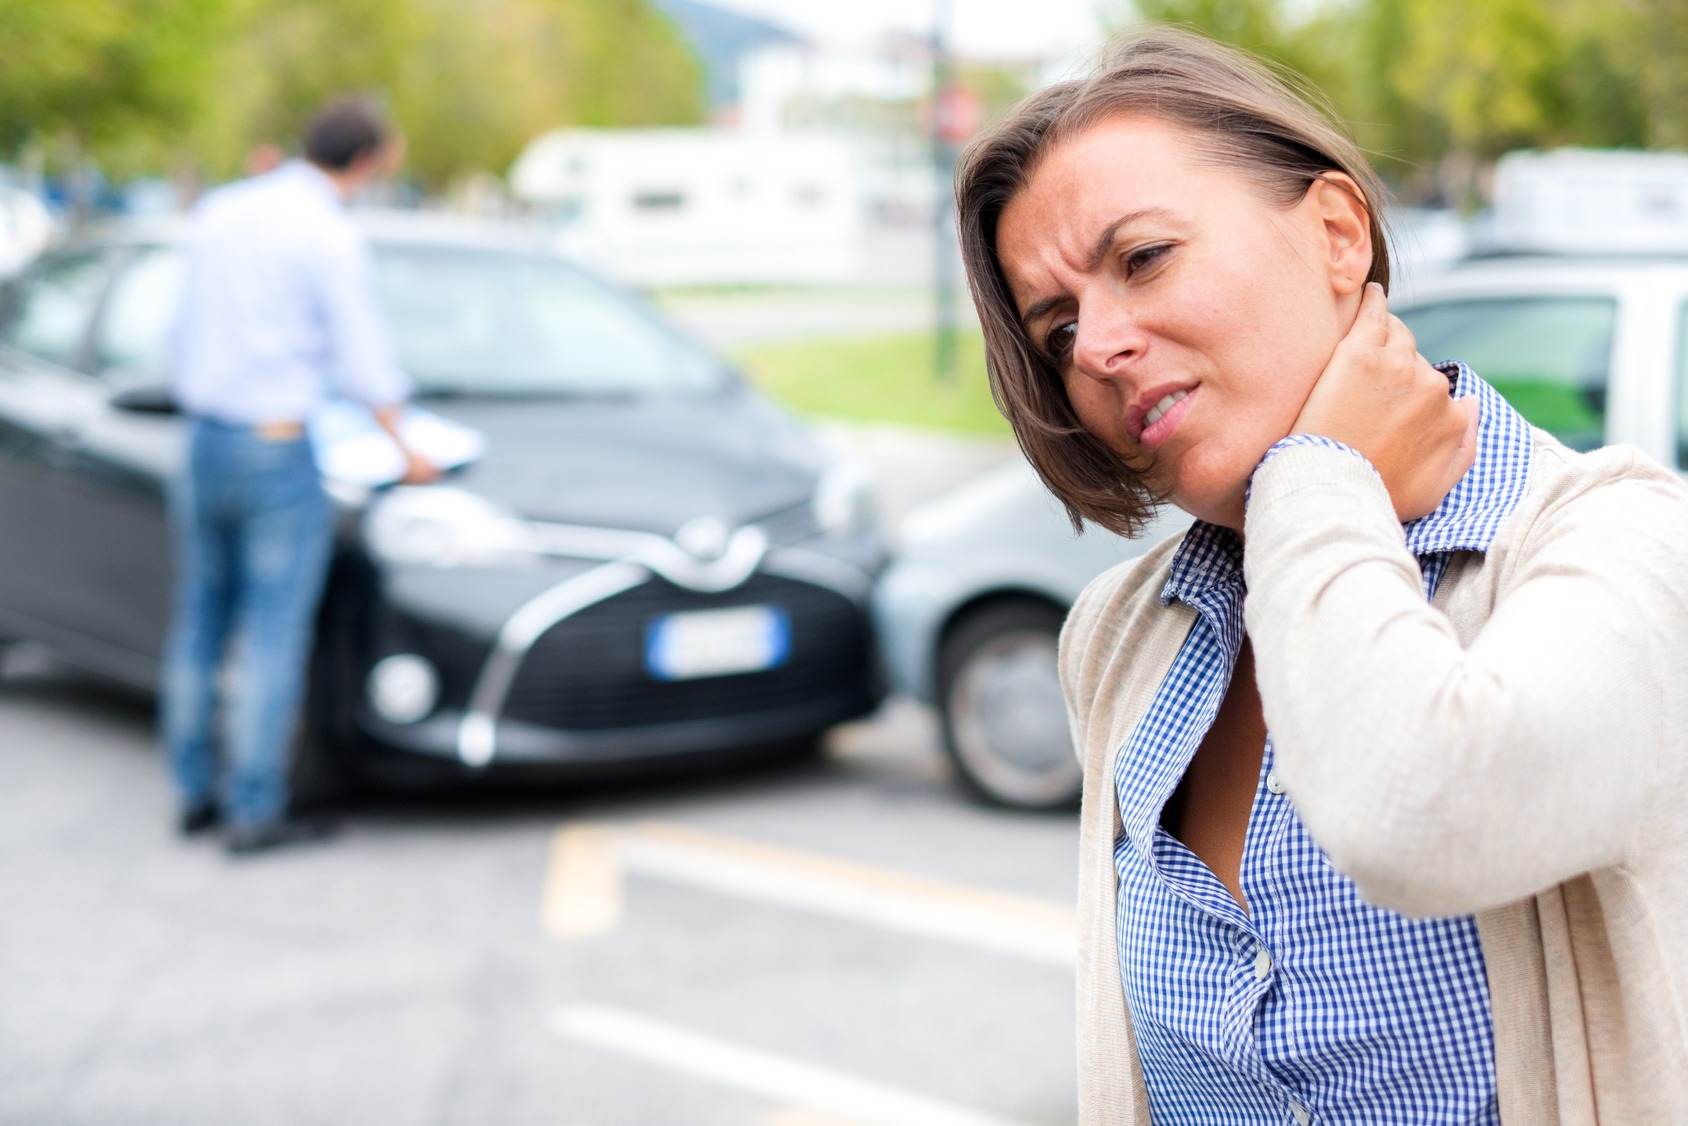 I Got In A Car Accident And My Back Hurts, What Should I Do?